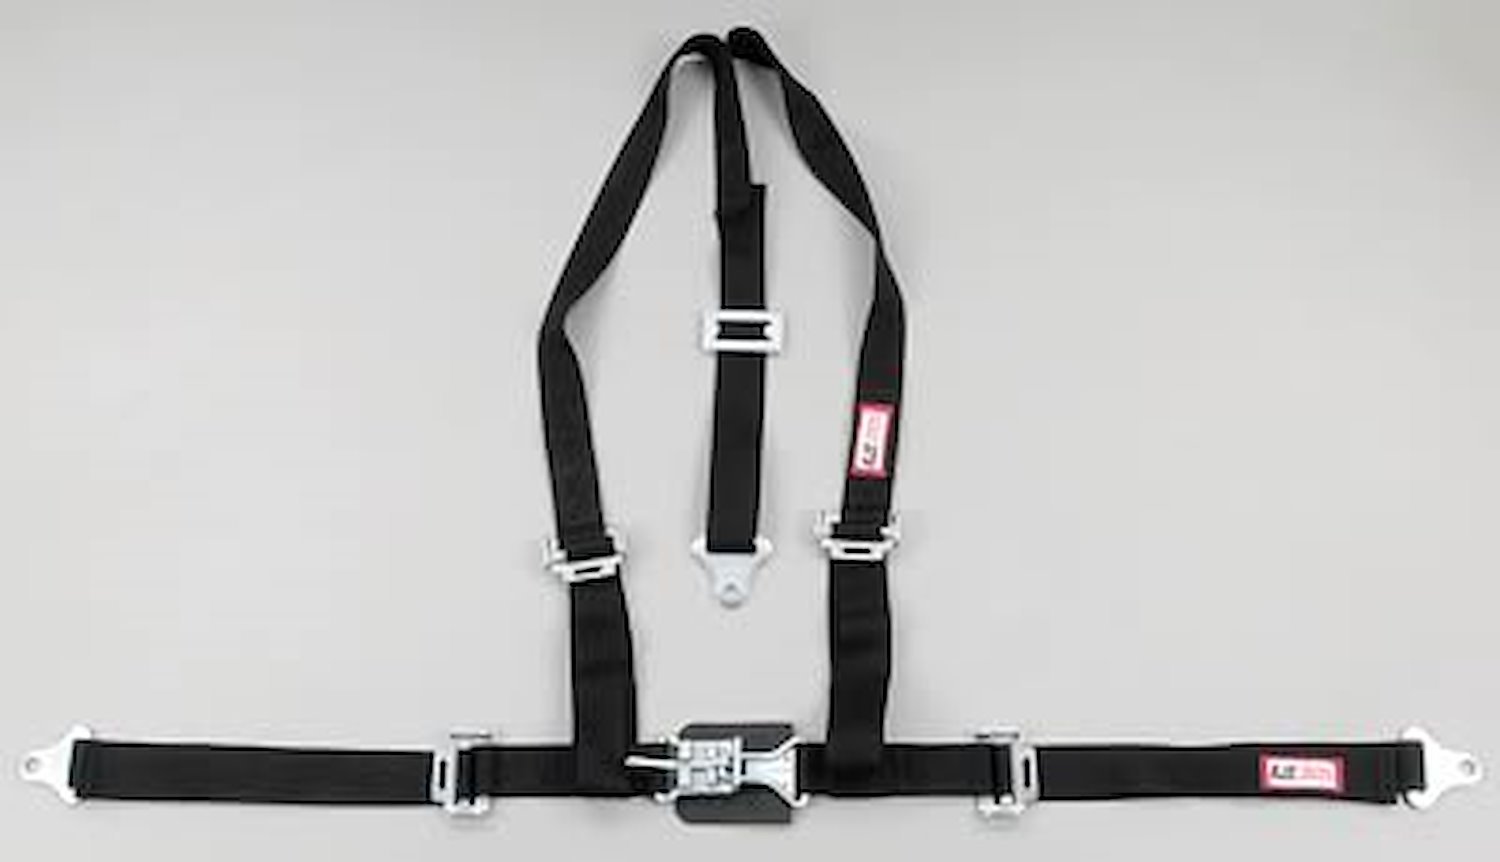 NON-SFI L&L HARNESS 3 PULL UP Lap BELT SNAP SEWN IN 2 S.H. Y FLOOR Mount WRAP/SNAP PURPLE